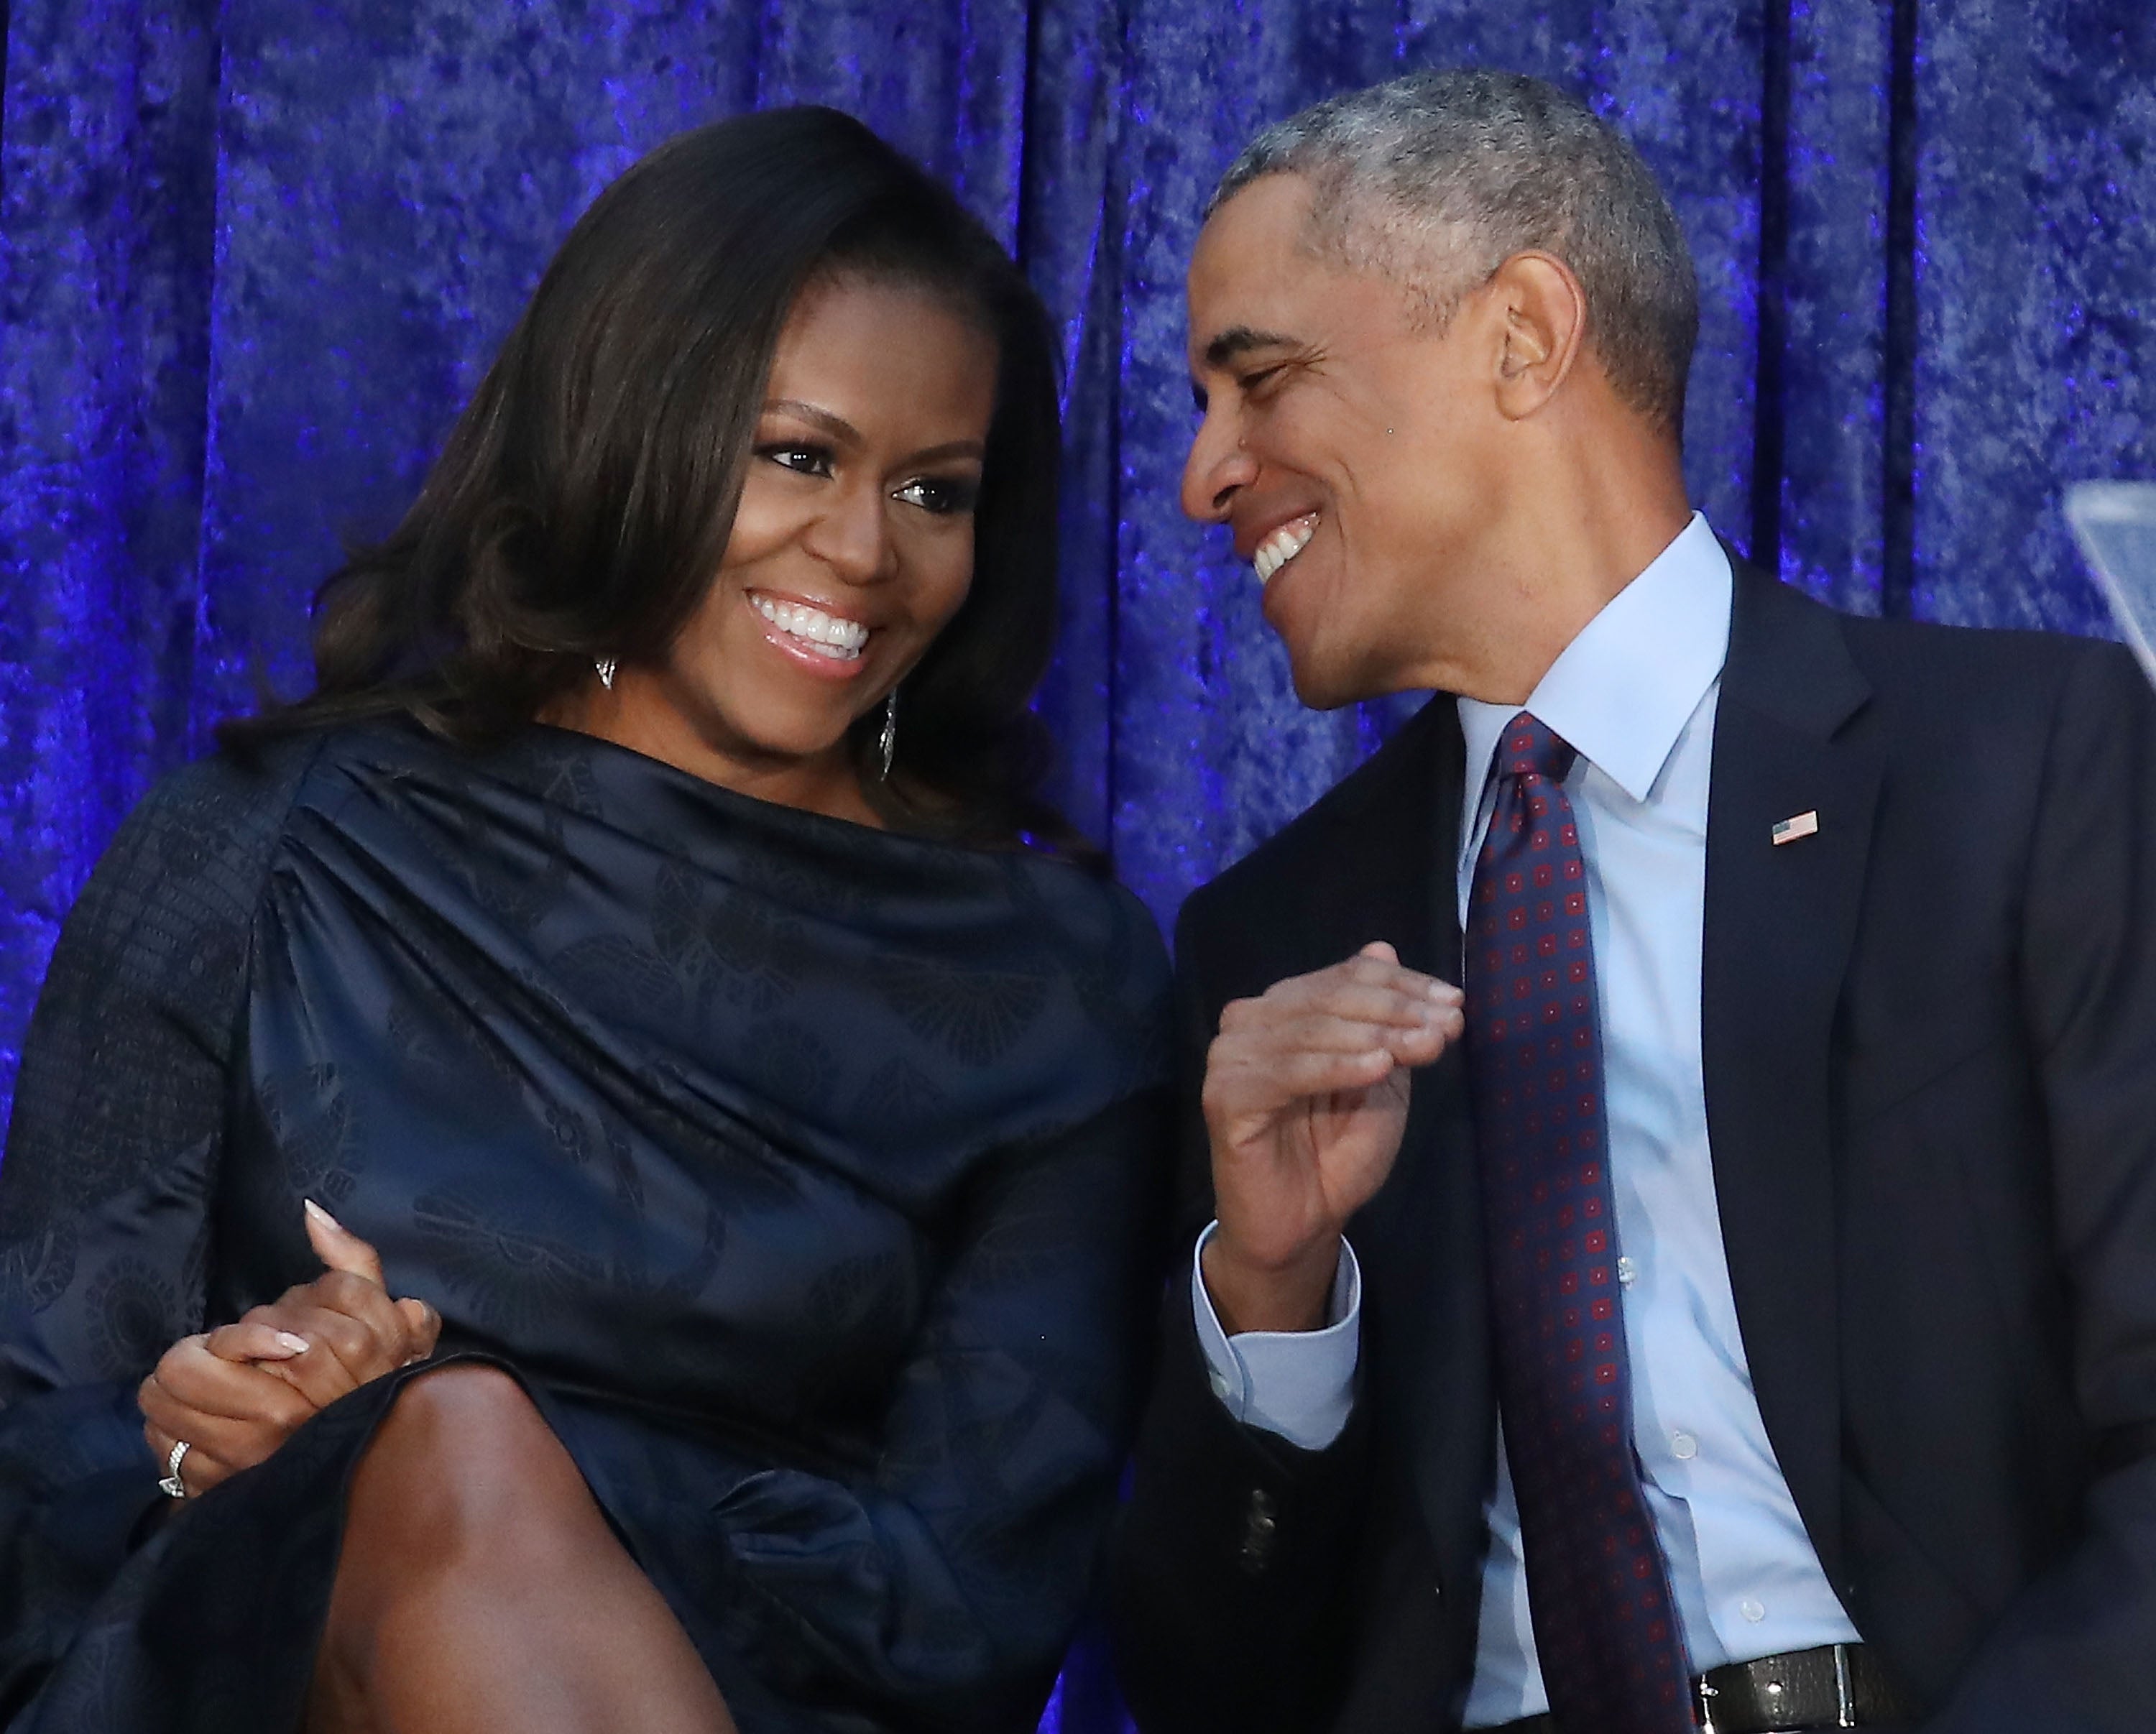 Michelle Obama Sexiest Nude - Joe Rogan drags 'declining' Biden, says Michelle Obama is best Democrat to  take on Trump in 2024 | The Independent